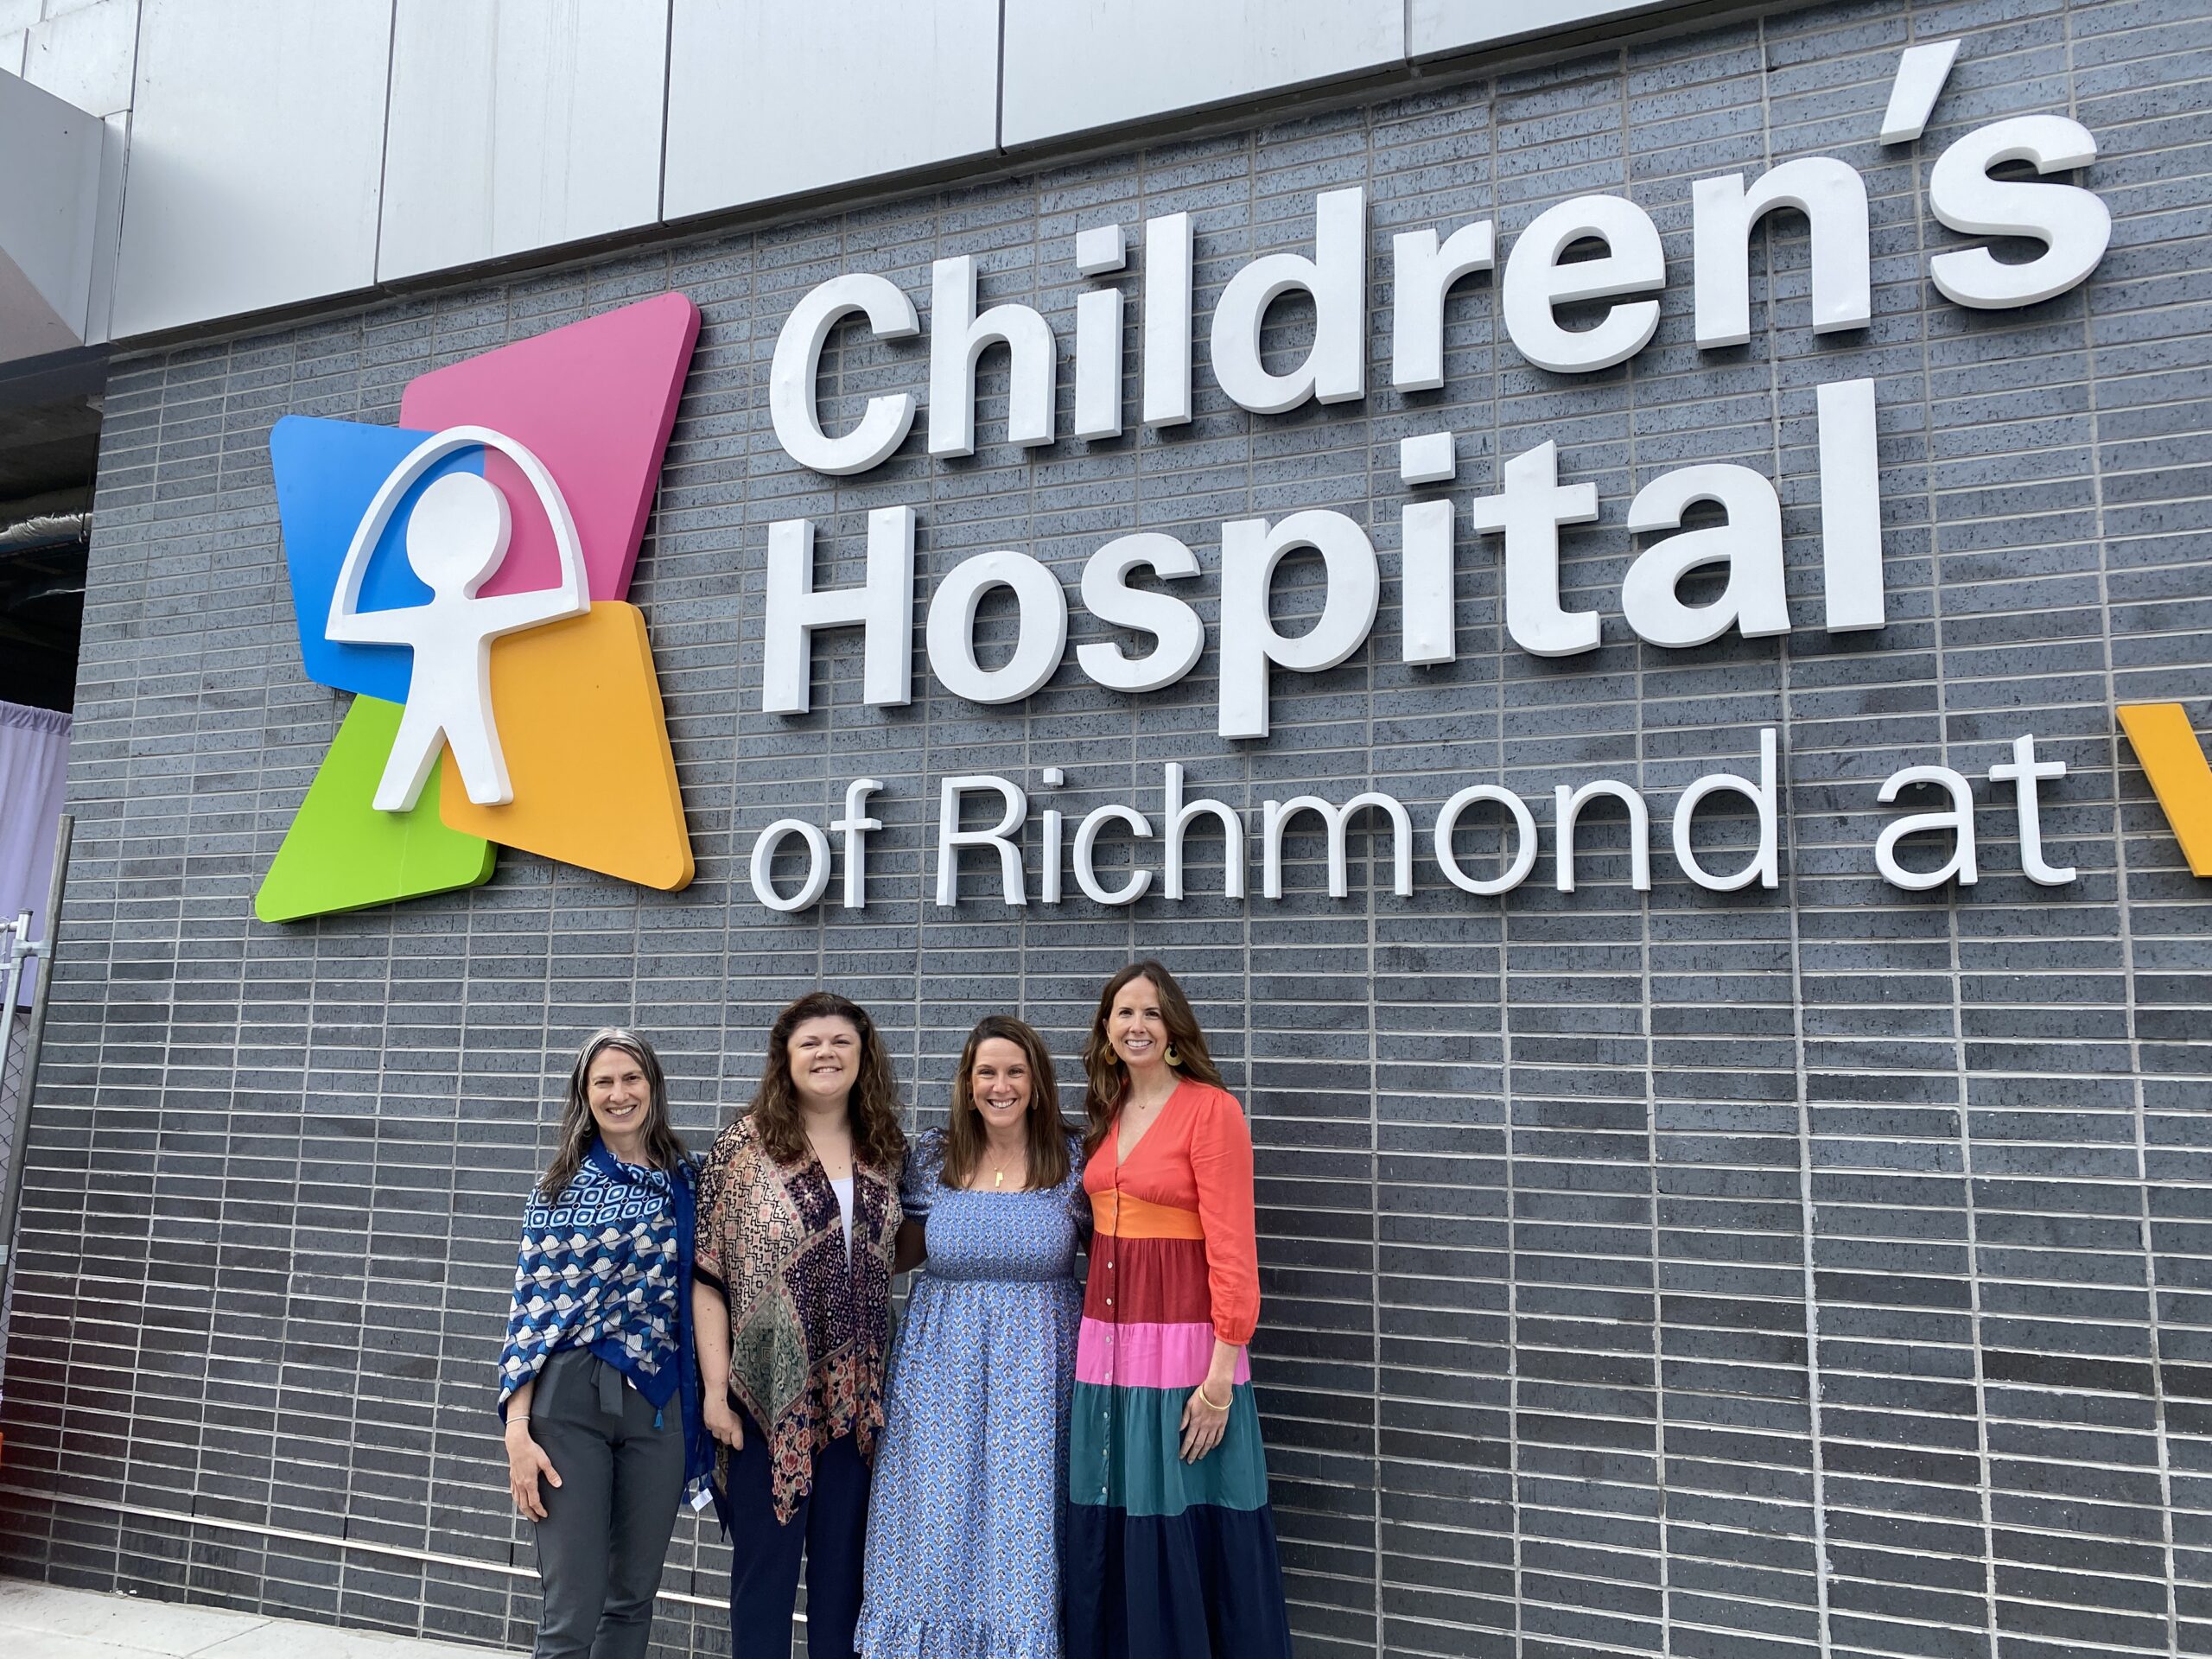 Ceci, Celia, Anne-Randolph and Erin are standing in front of the large sign for the Children's Hospital of Richmond at VCU